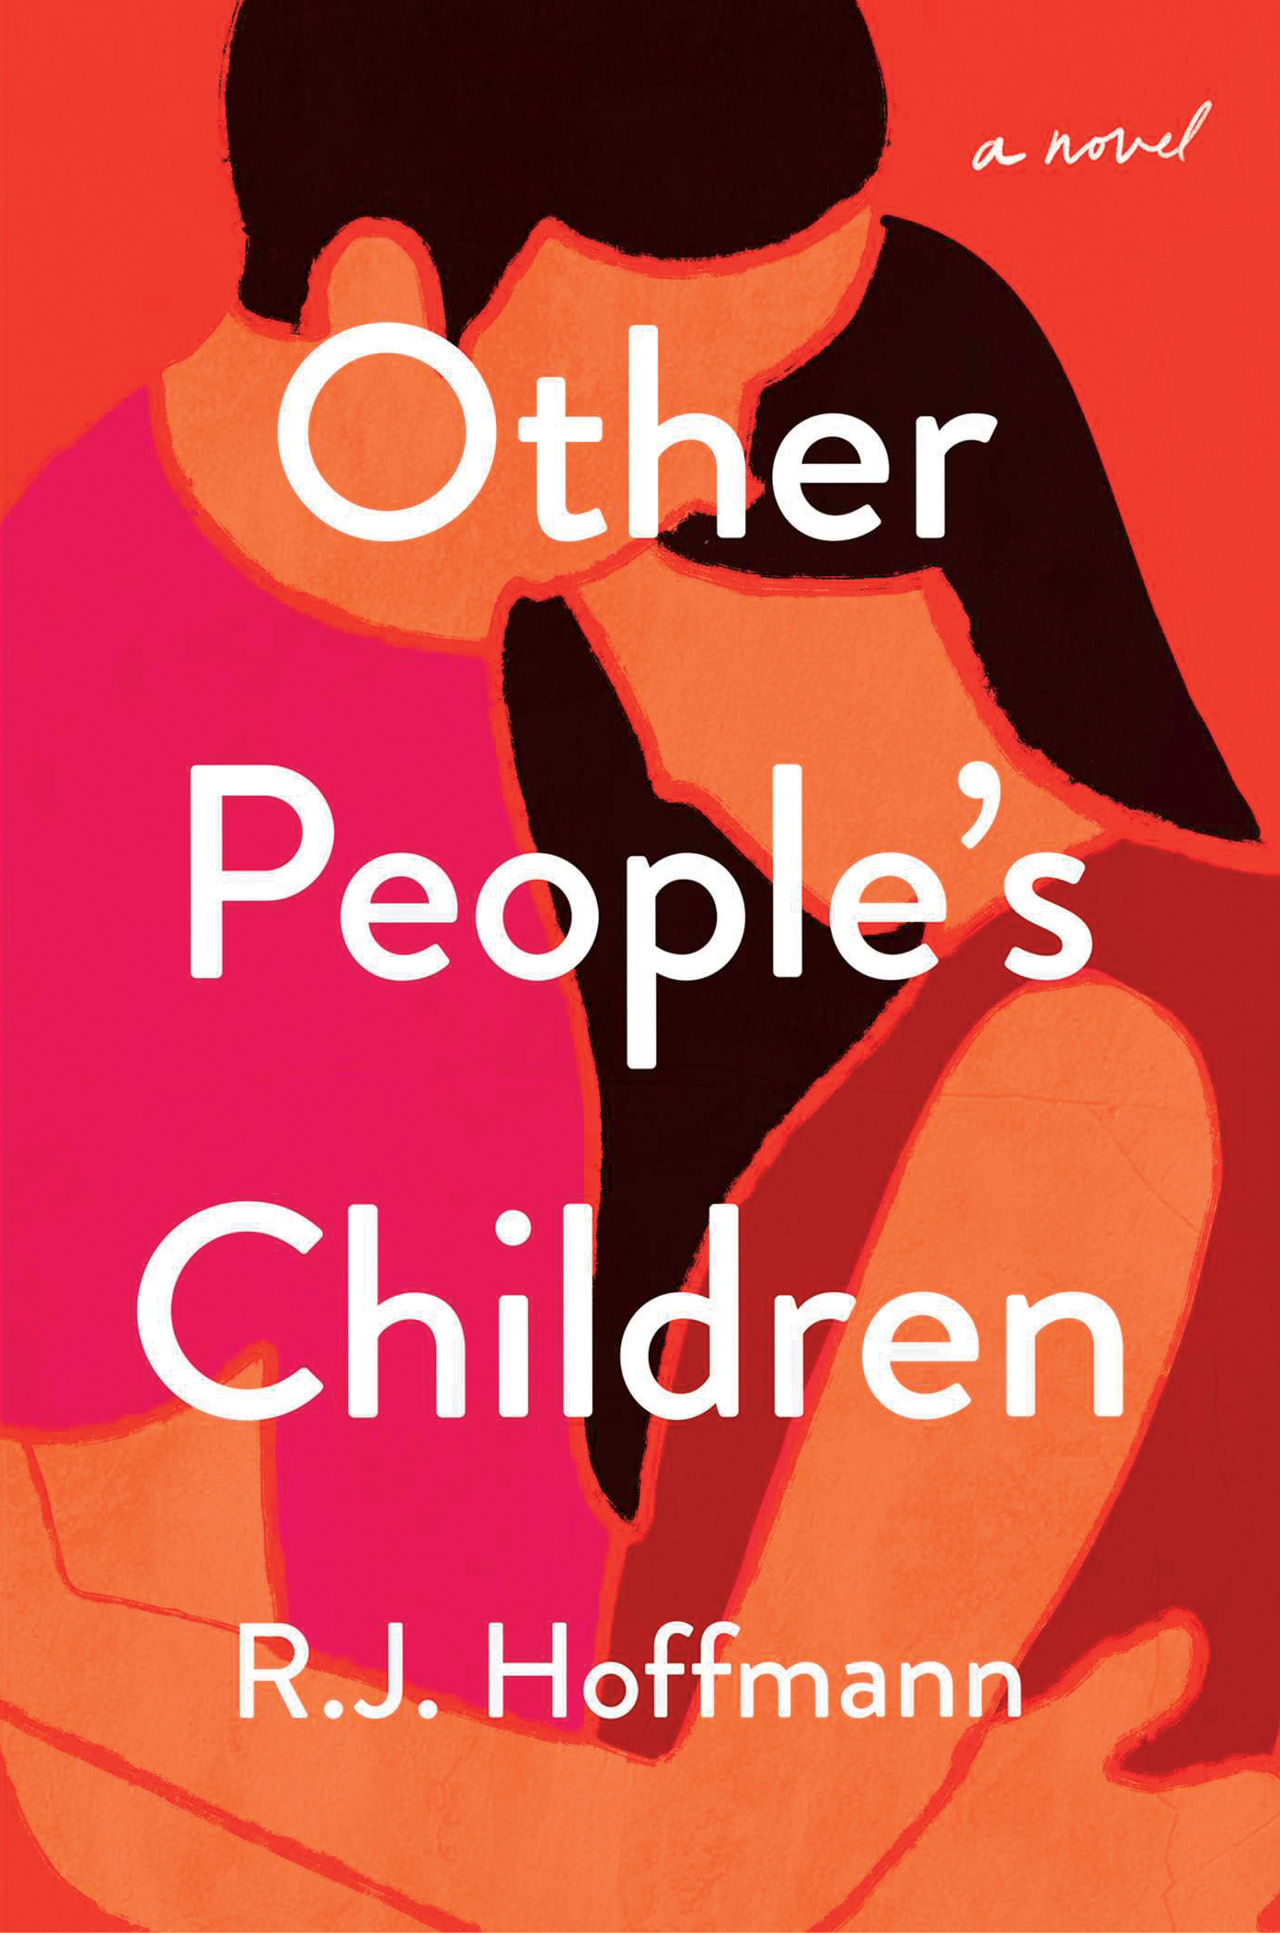  Other People’s Children by R.J. Hoffmann